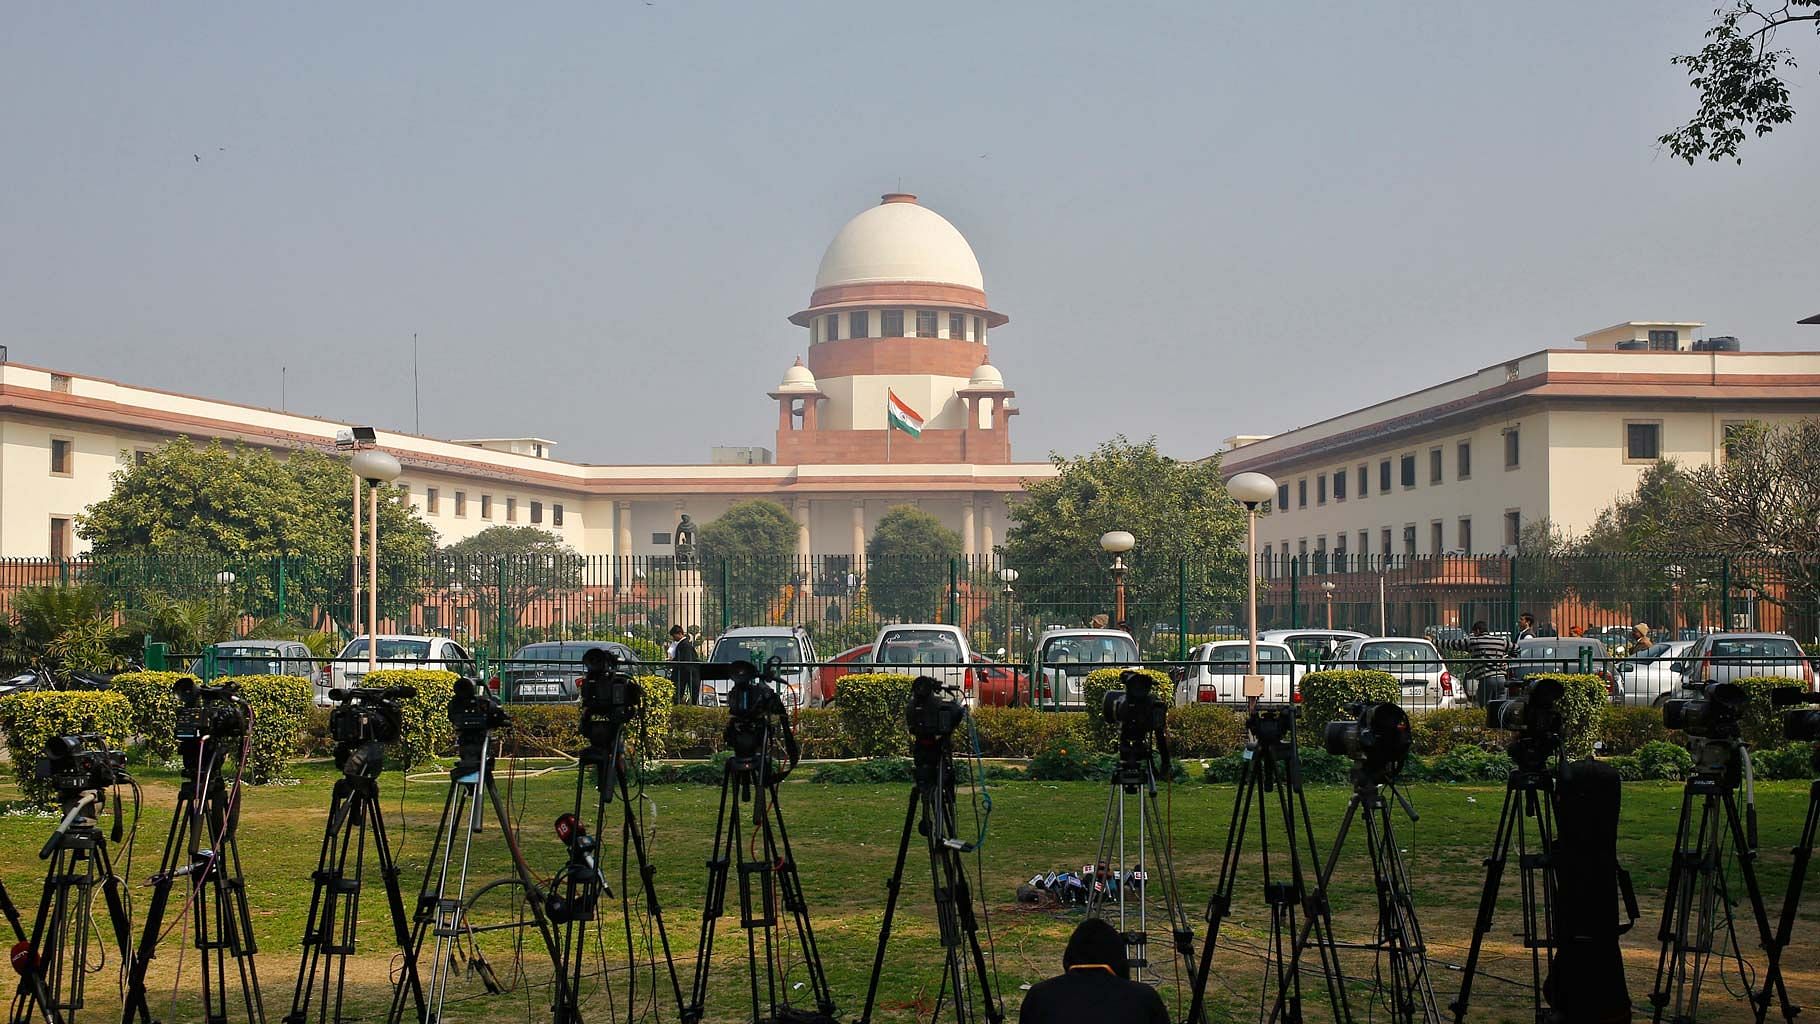  Freedom of press cannot be a one-way-traffic and yellow journalism should not take place, the Supreme Court said on Tuesday.